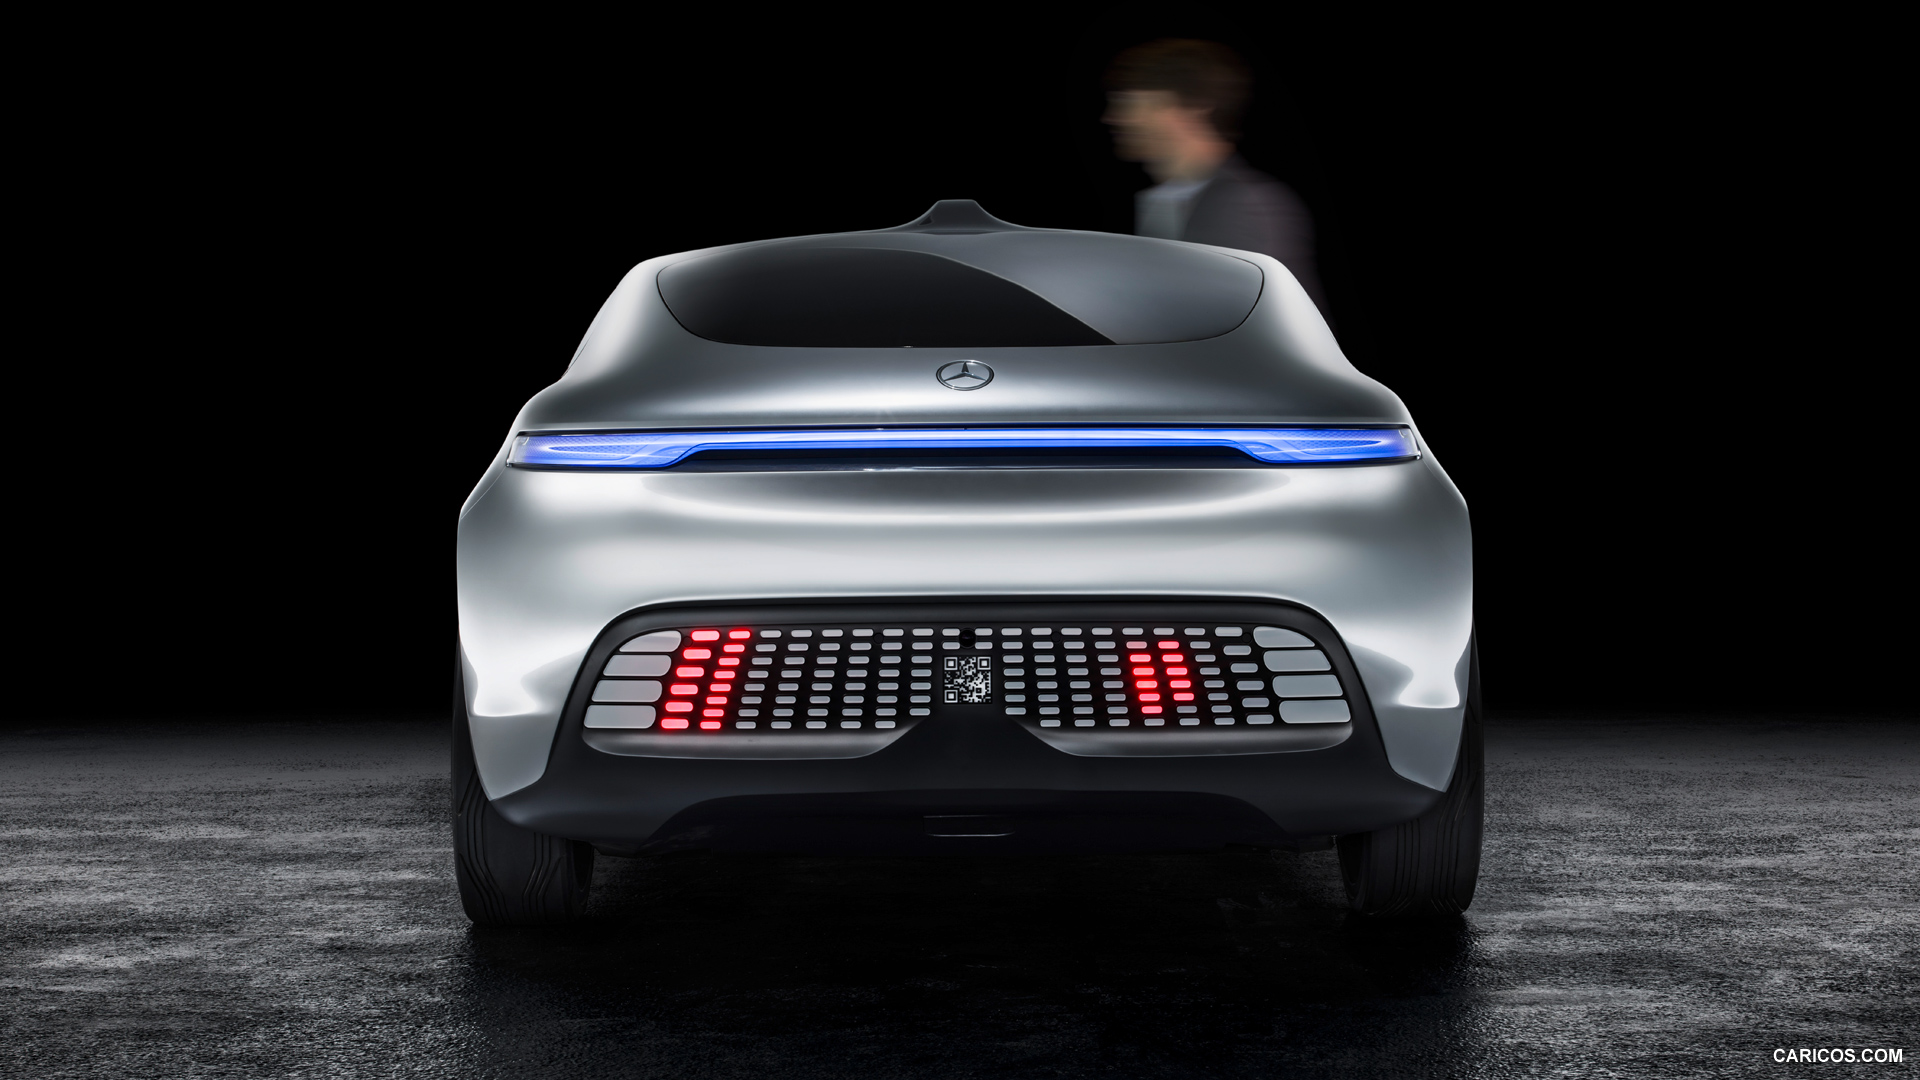 2015 Mercedes-Benz F 015 Luxury in Motion Concept  - Rear, #56 of 92